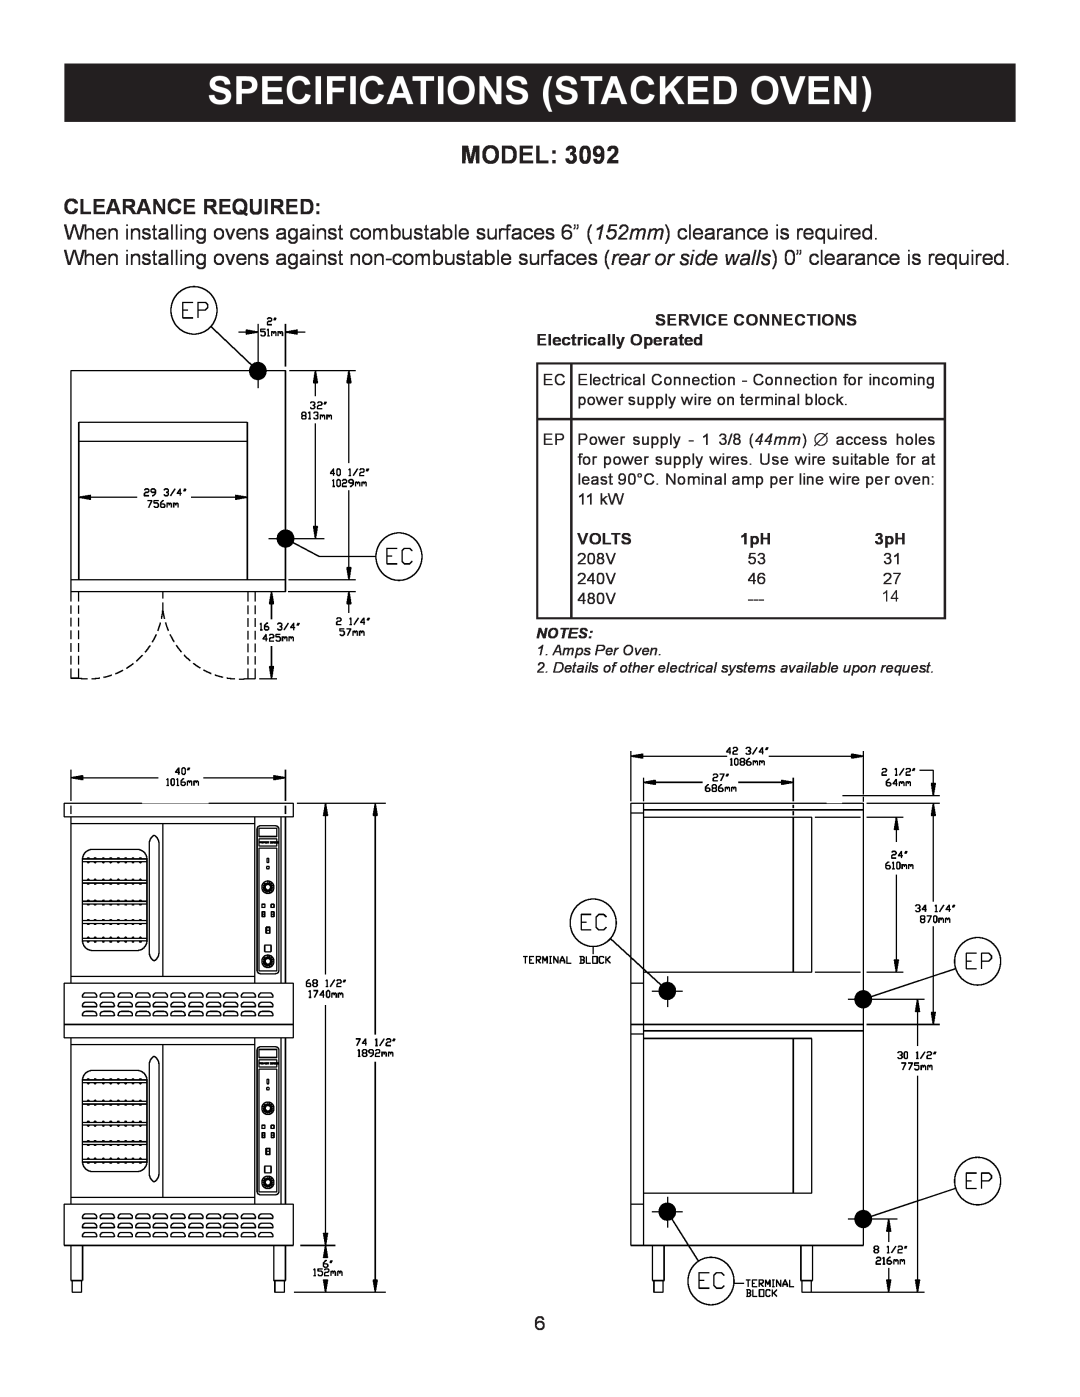 Market Forge Industries M 3000, M 3092 owner manual Specifications Stacked Oven, Model, Clearance Required 